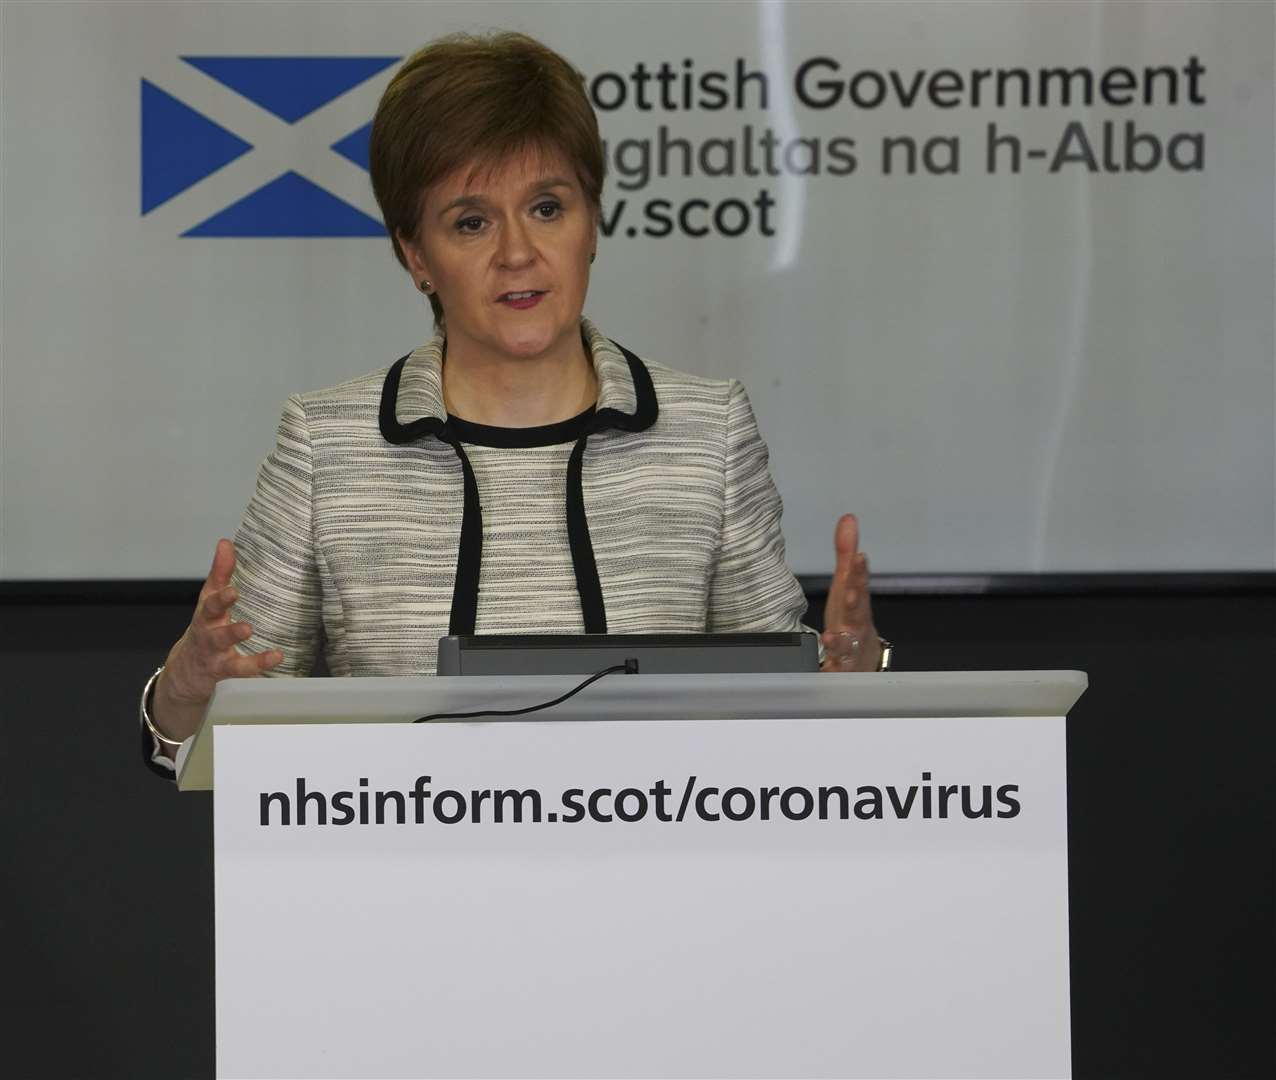 Nicola Sturgeon said the Scottish Government will work with care home providers, local health protection teams and the Care Inspectorate to ensure care home staff and residents have the support and equipment they need.